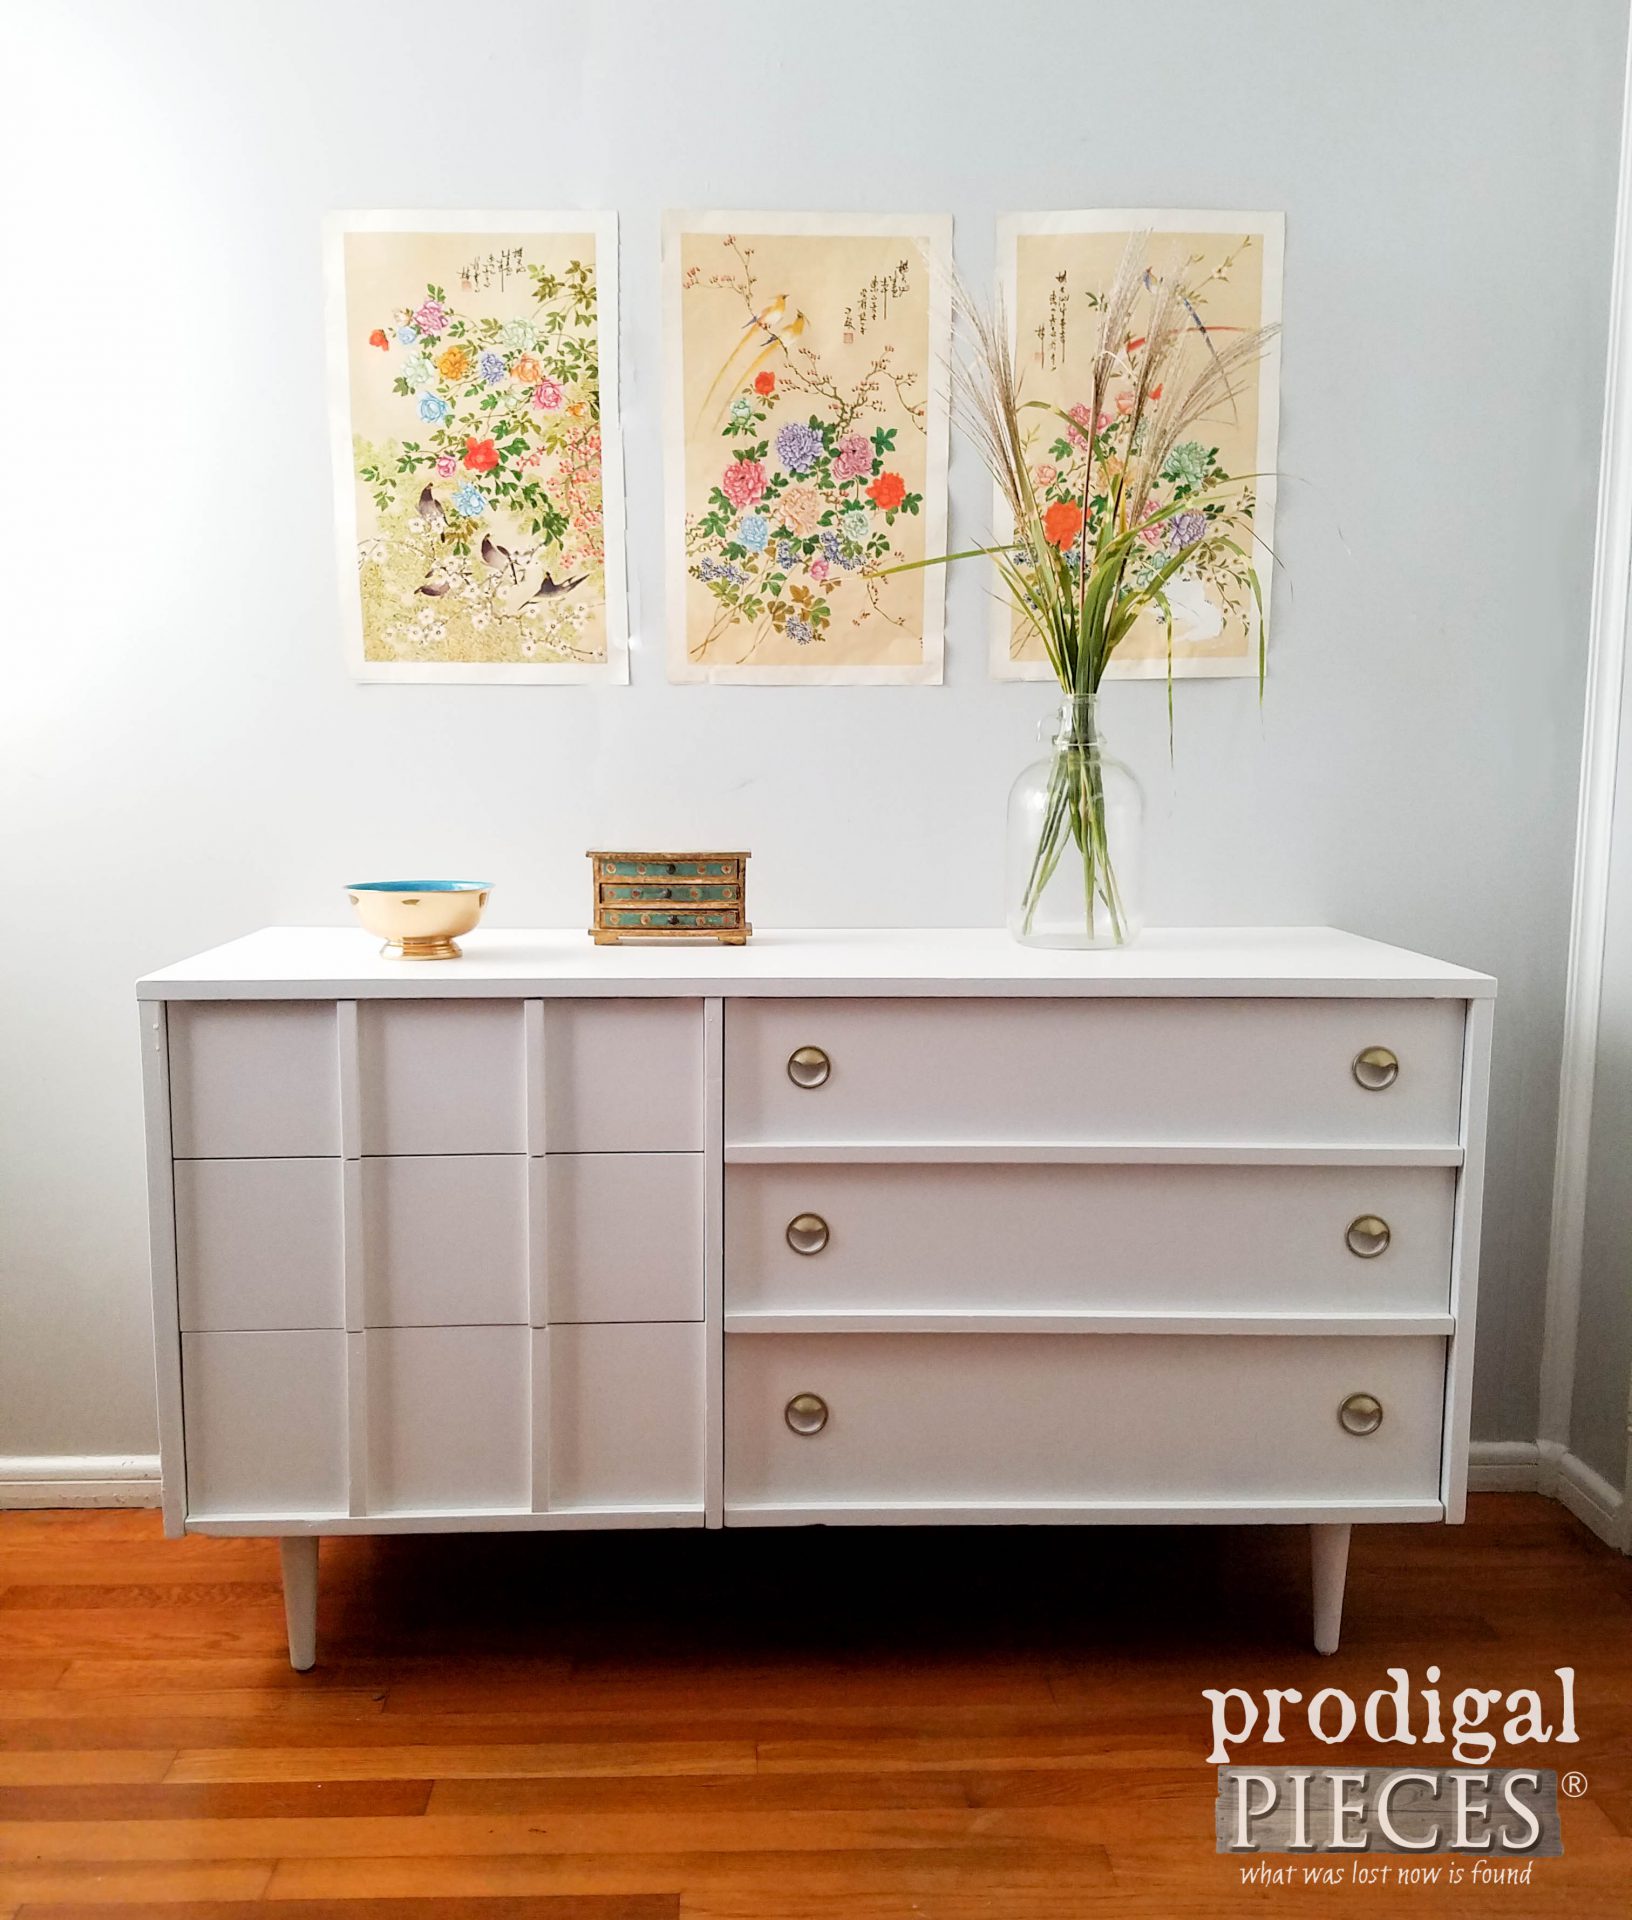 Mid Century Modern Dresser in White | How to Paint Furniture by Larissa of Prodigal Pieces | prodigalpieces.com #prodigalpieces #midcentury #modern #furniture